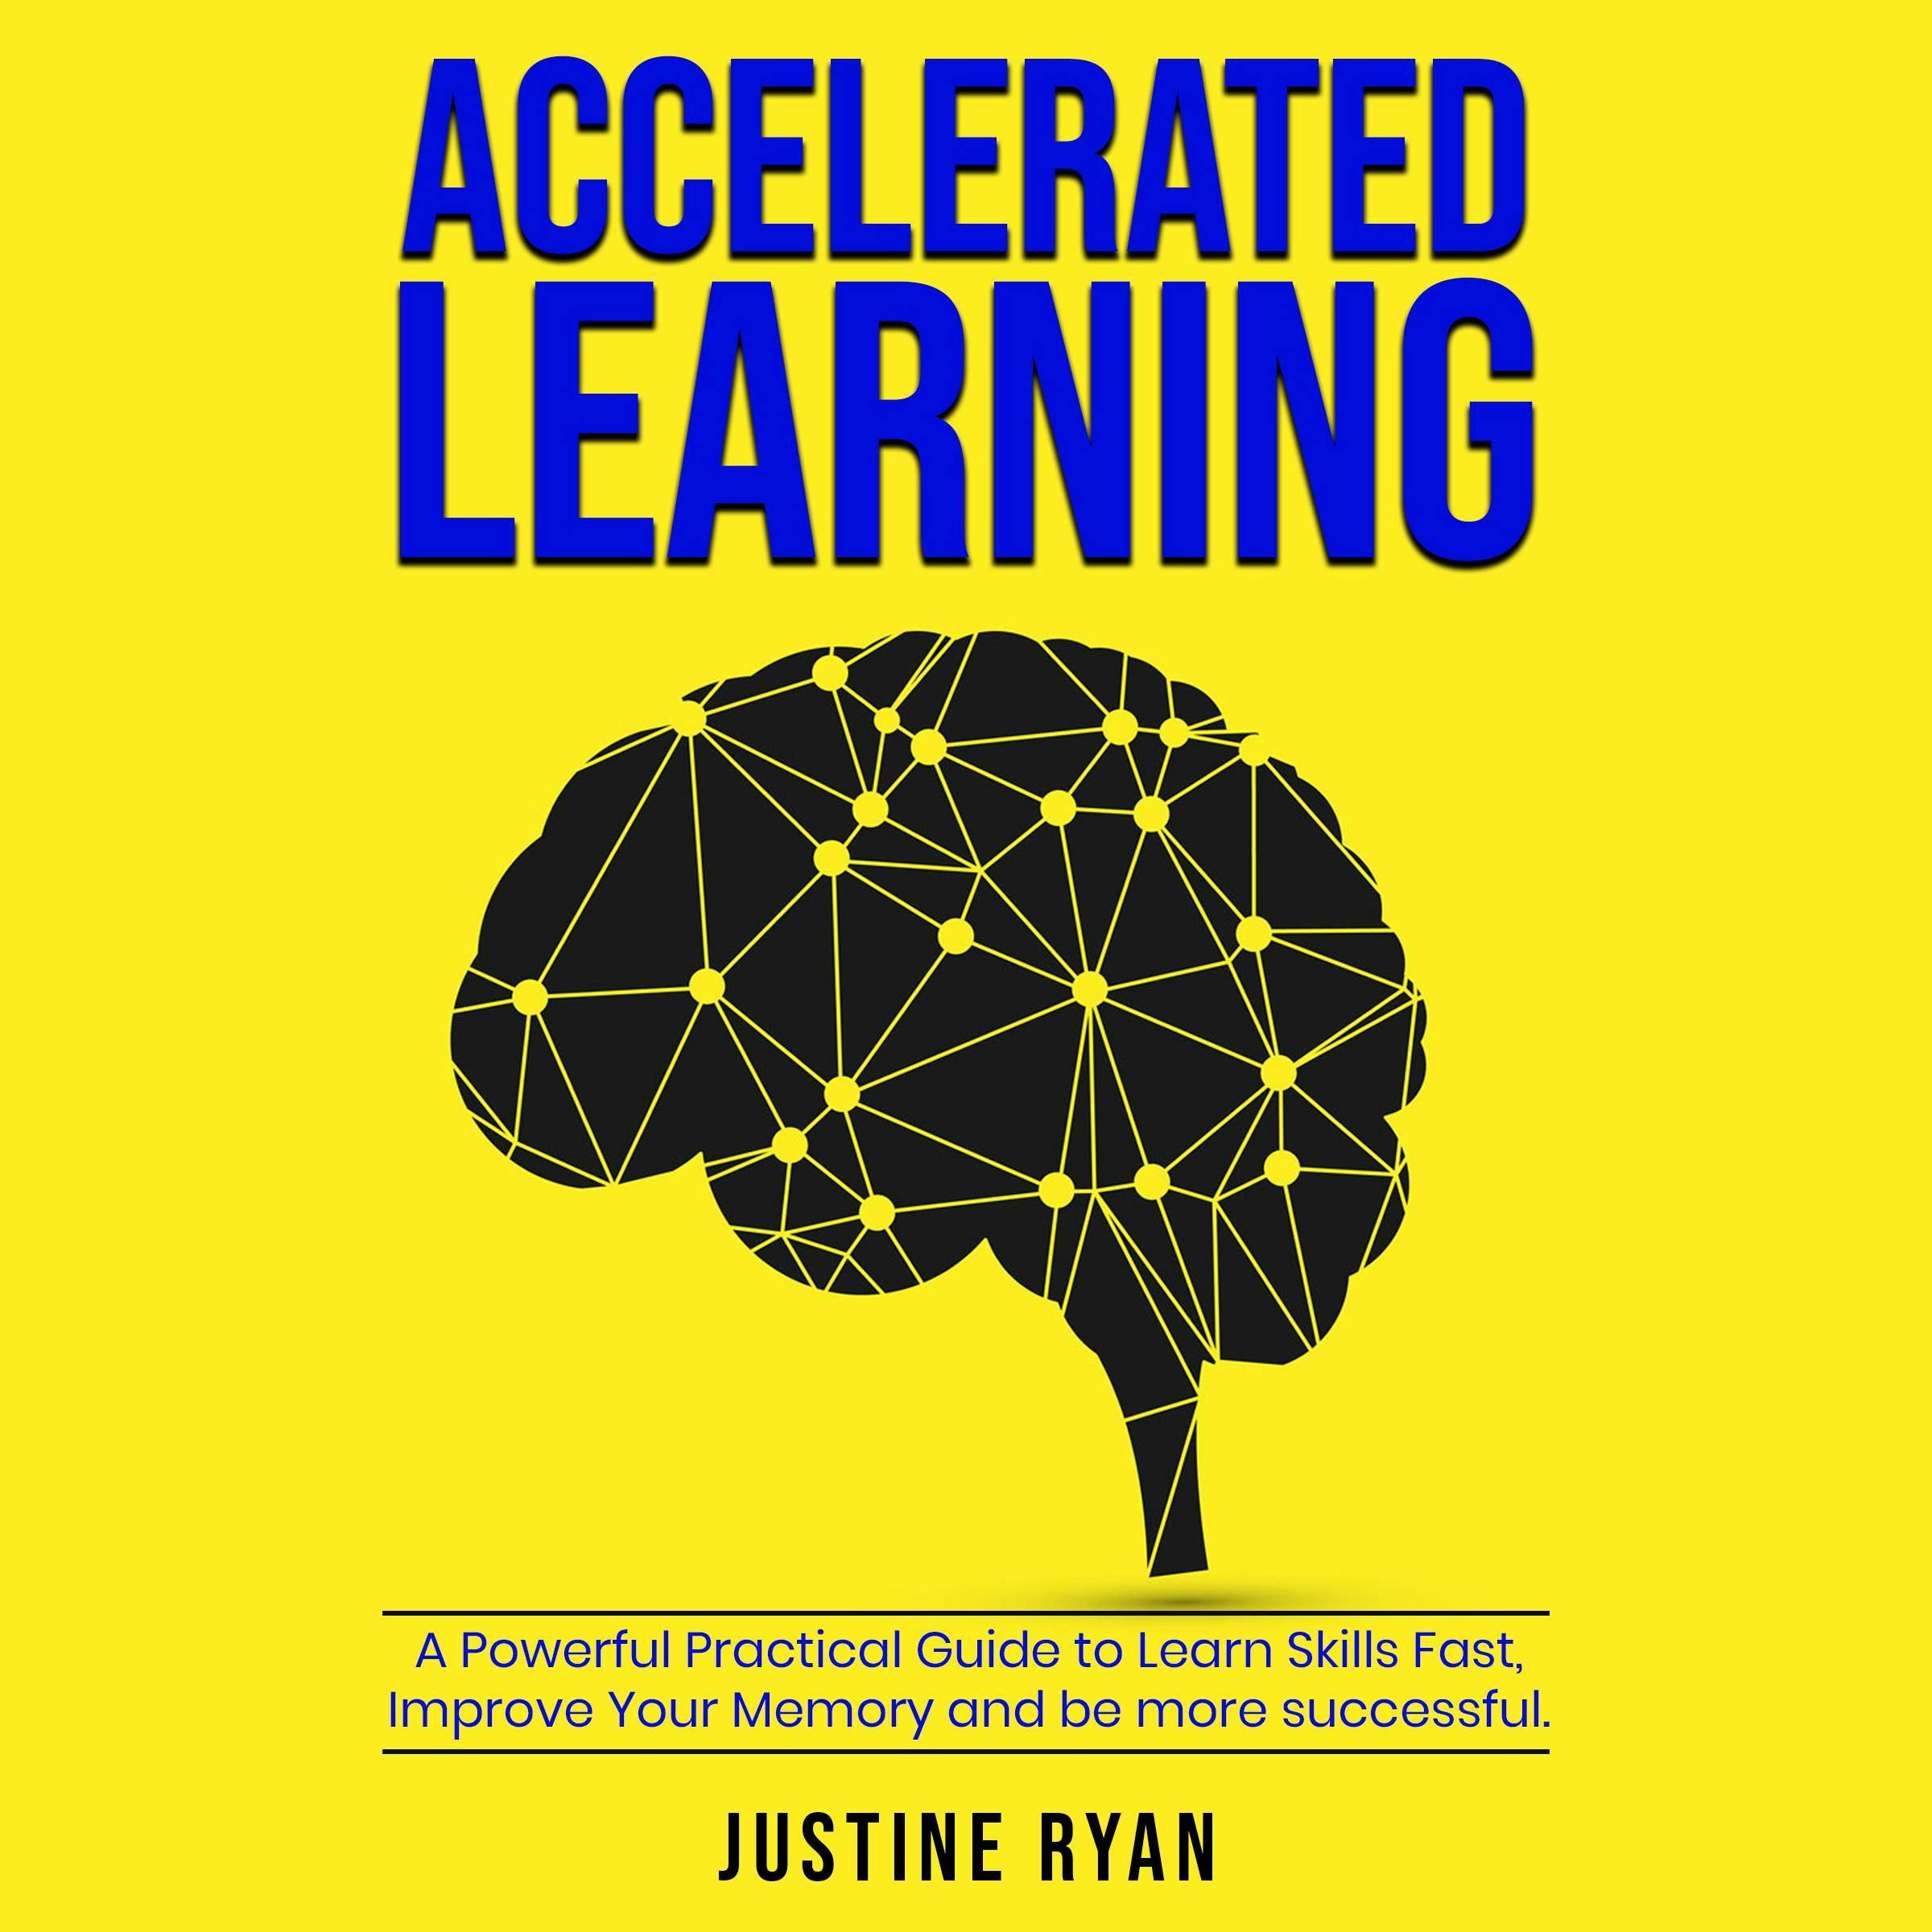 ACCELERATED LEARNING: A Powerful Practical Guide To Learn Skills Fast, Improve Your Memory And Be More Successful - JUSTINE RYAN